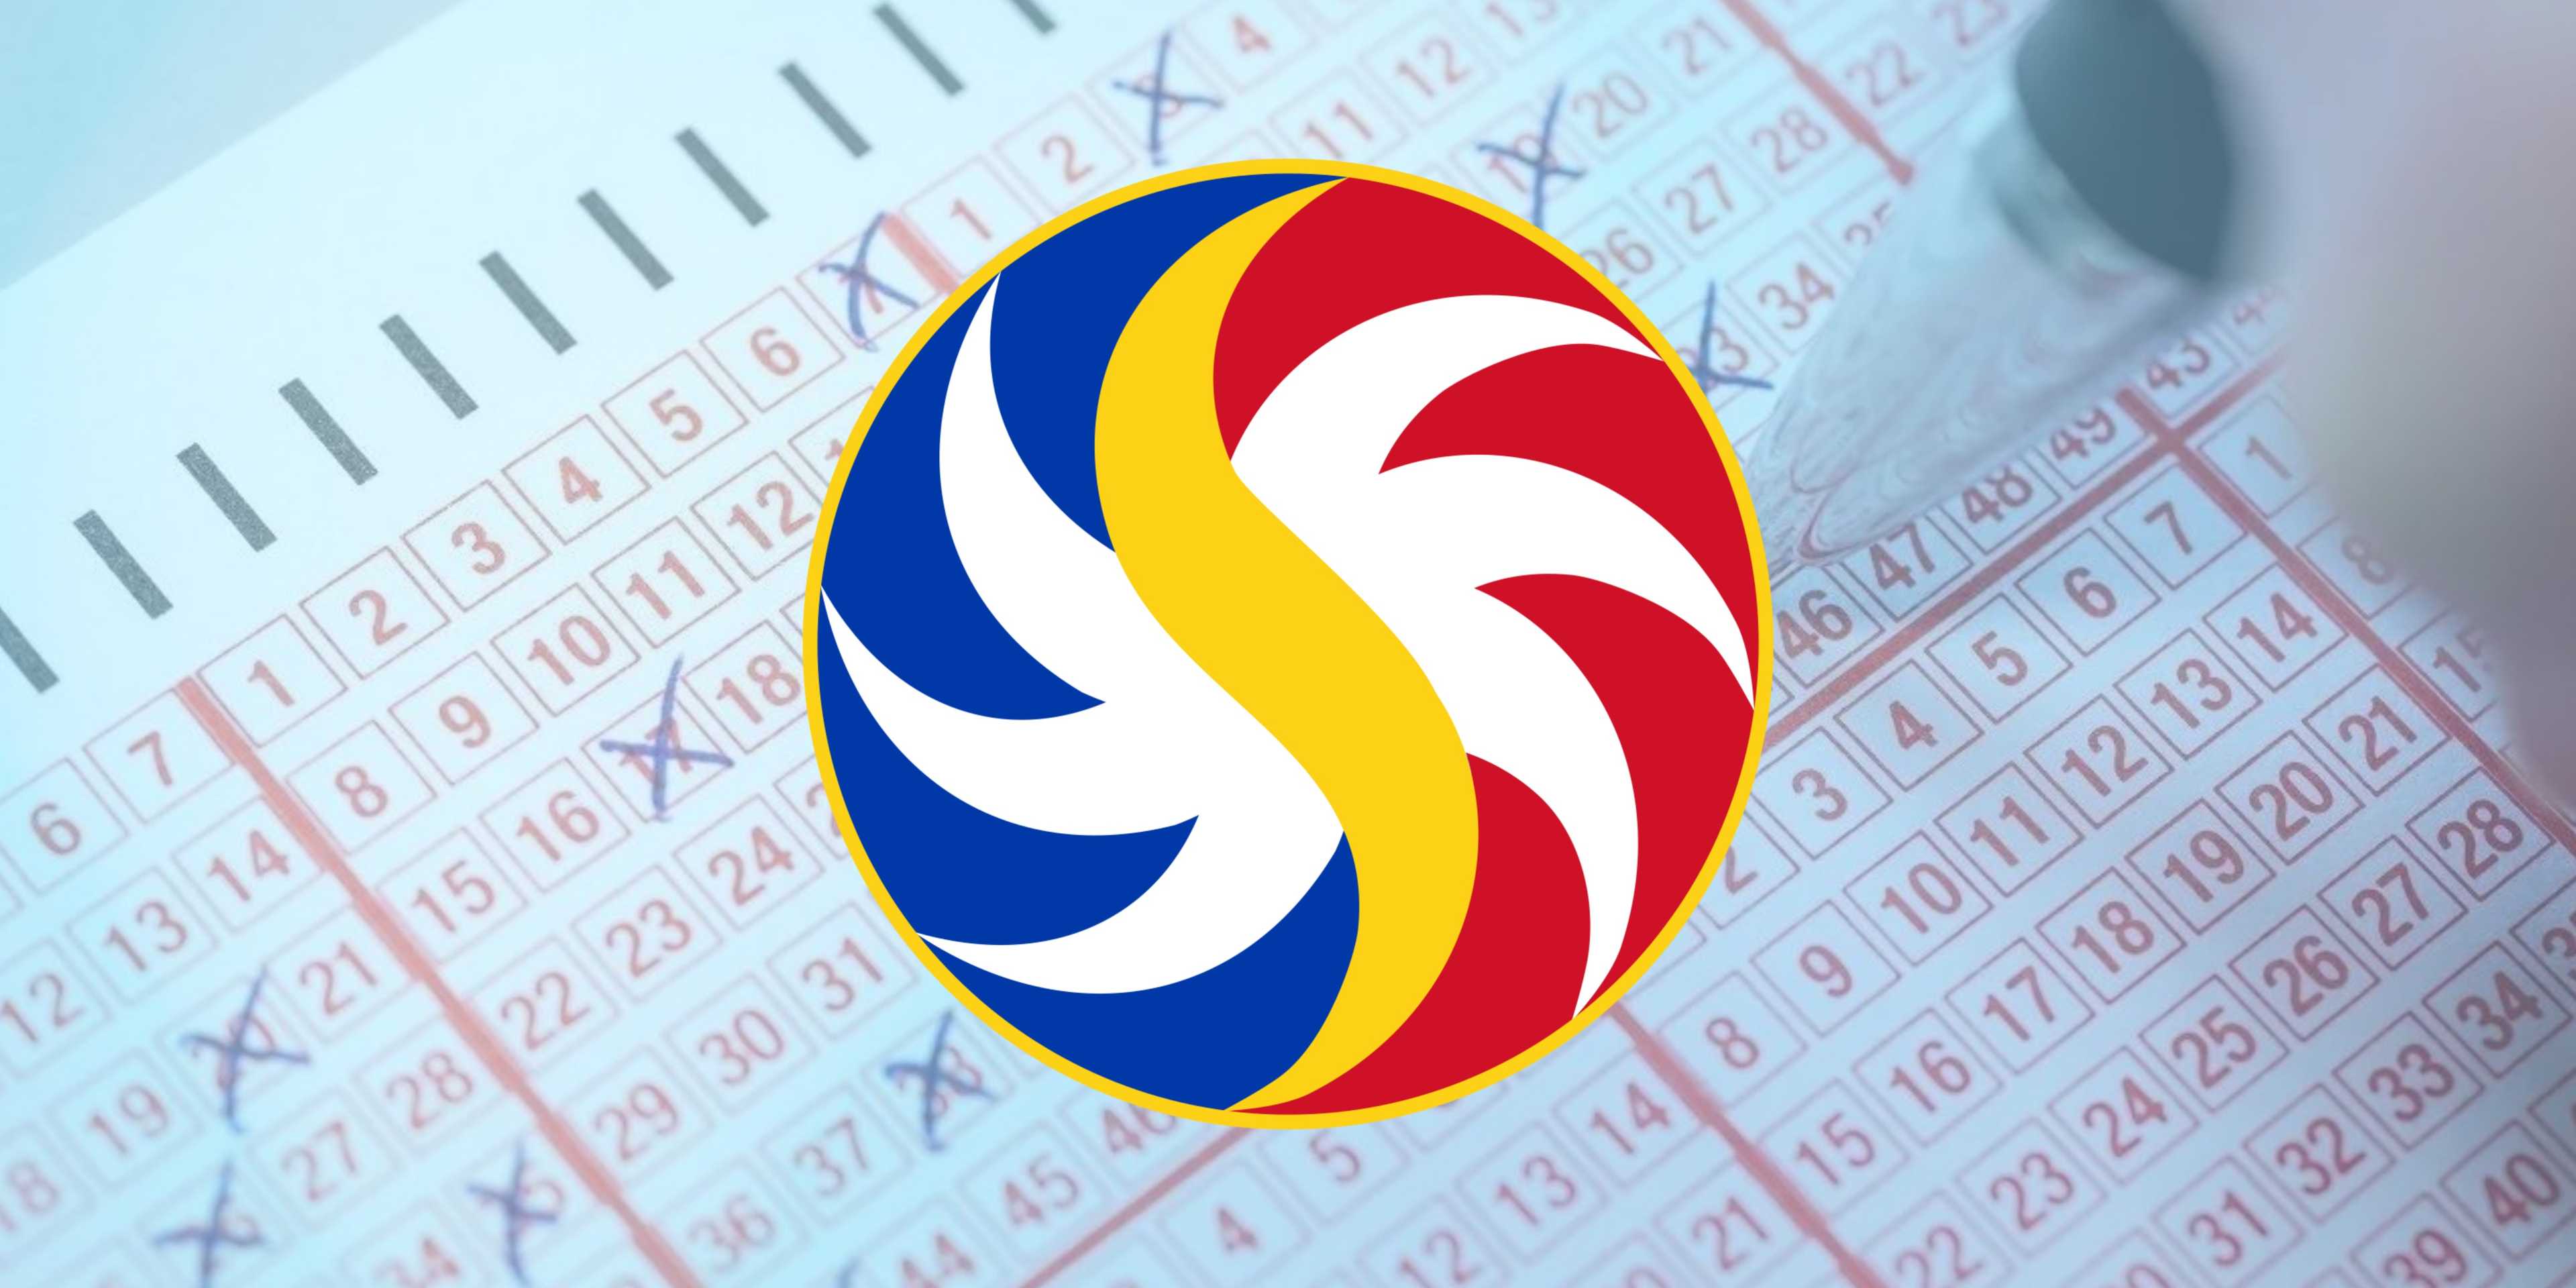 PCSO Lotto Draw Results on Friday, January 26